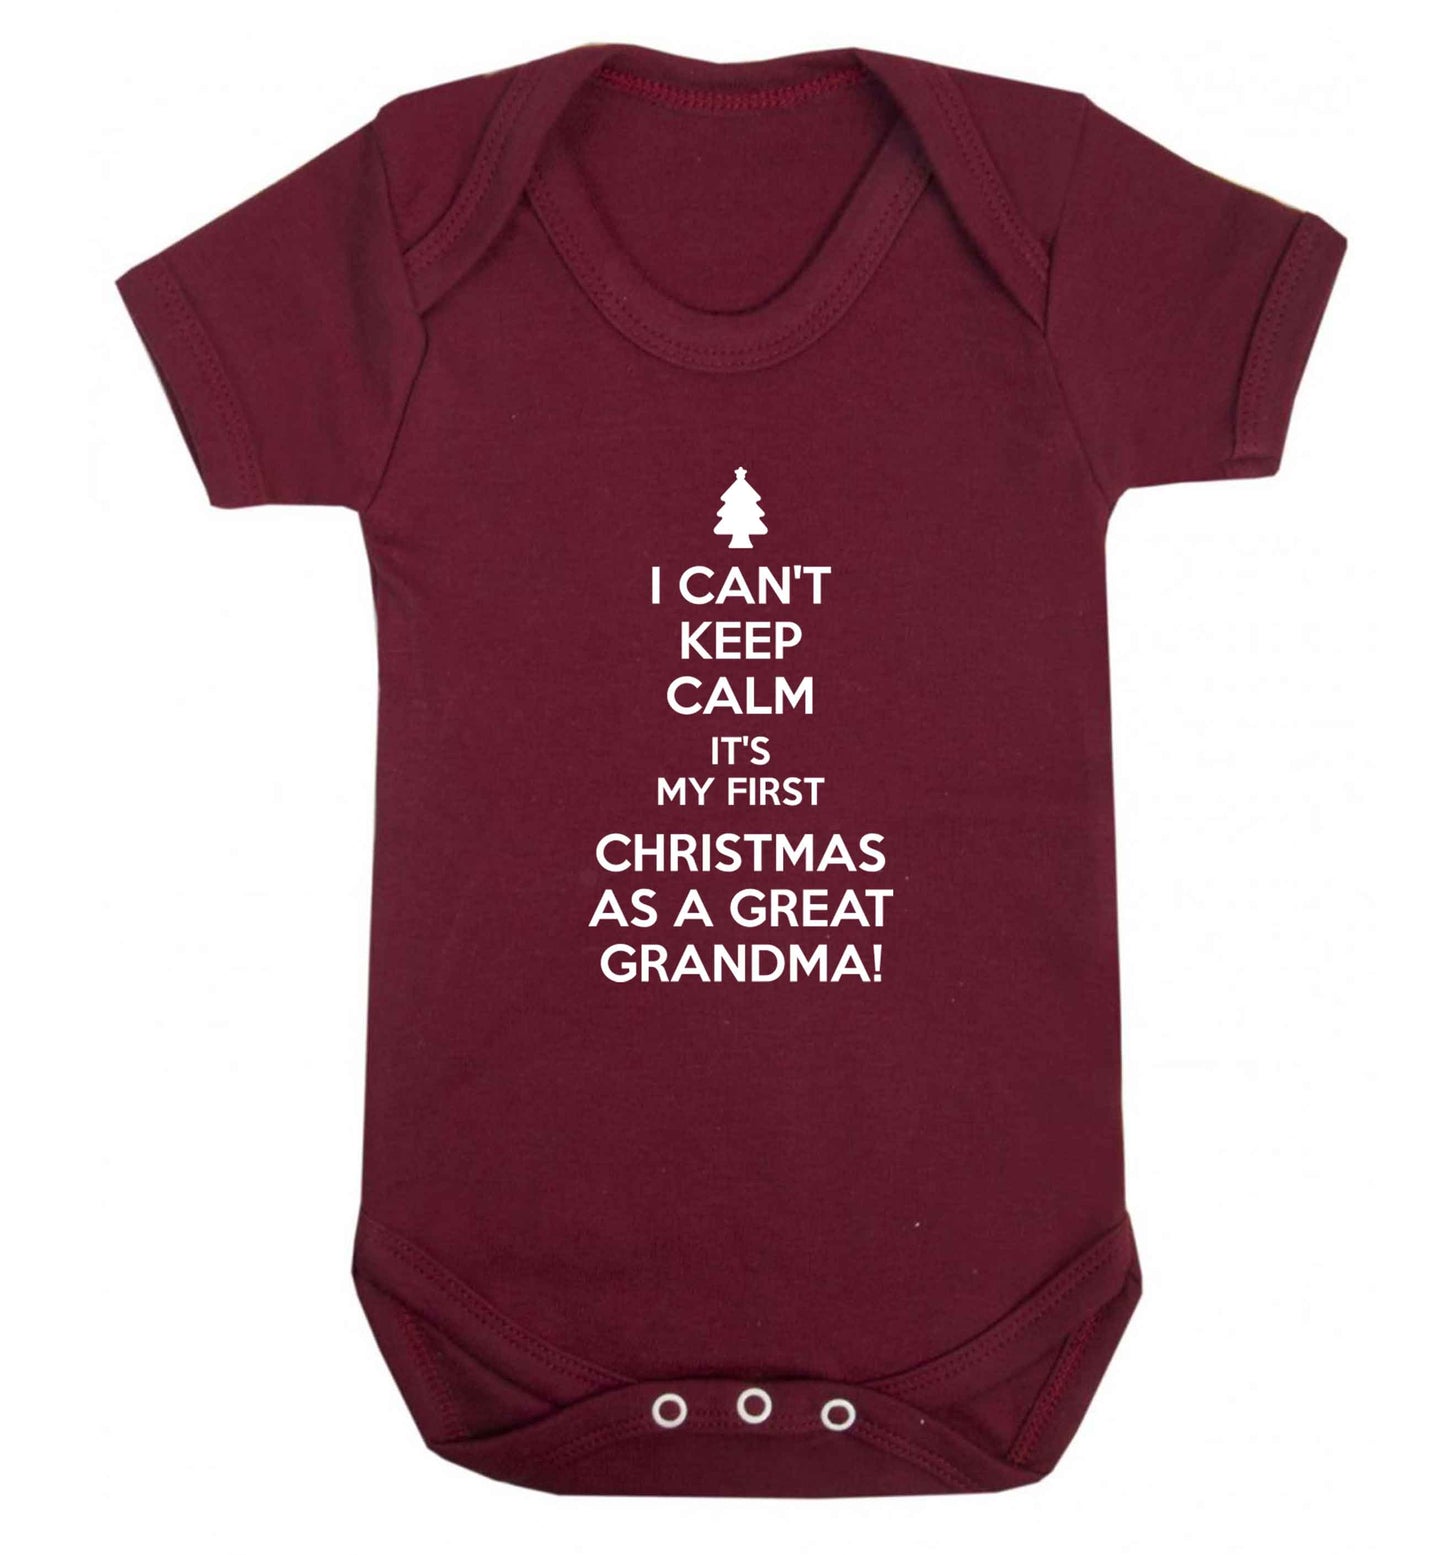 I can't keep calm it's my first Christmas as a great grandma! Baby Vest maroon 18-24 months